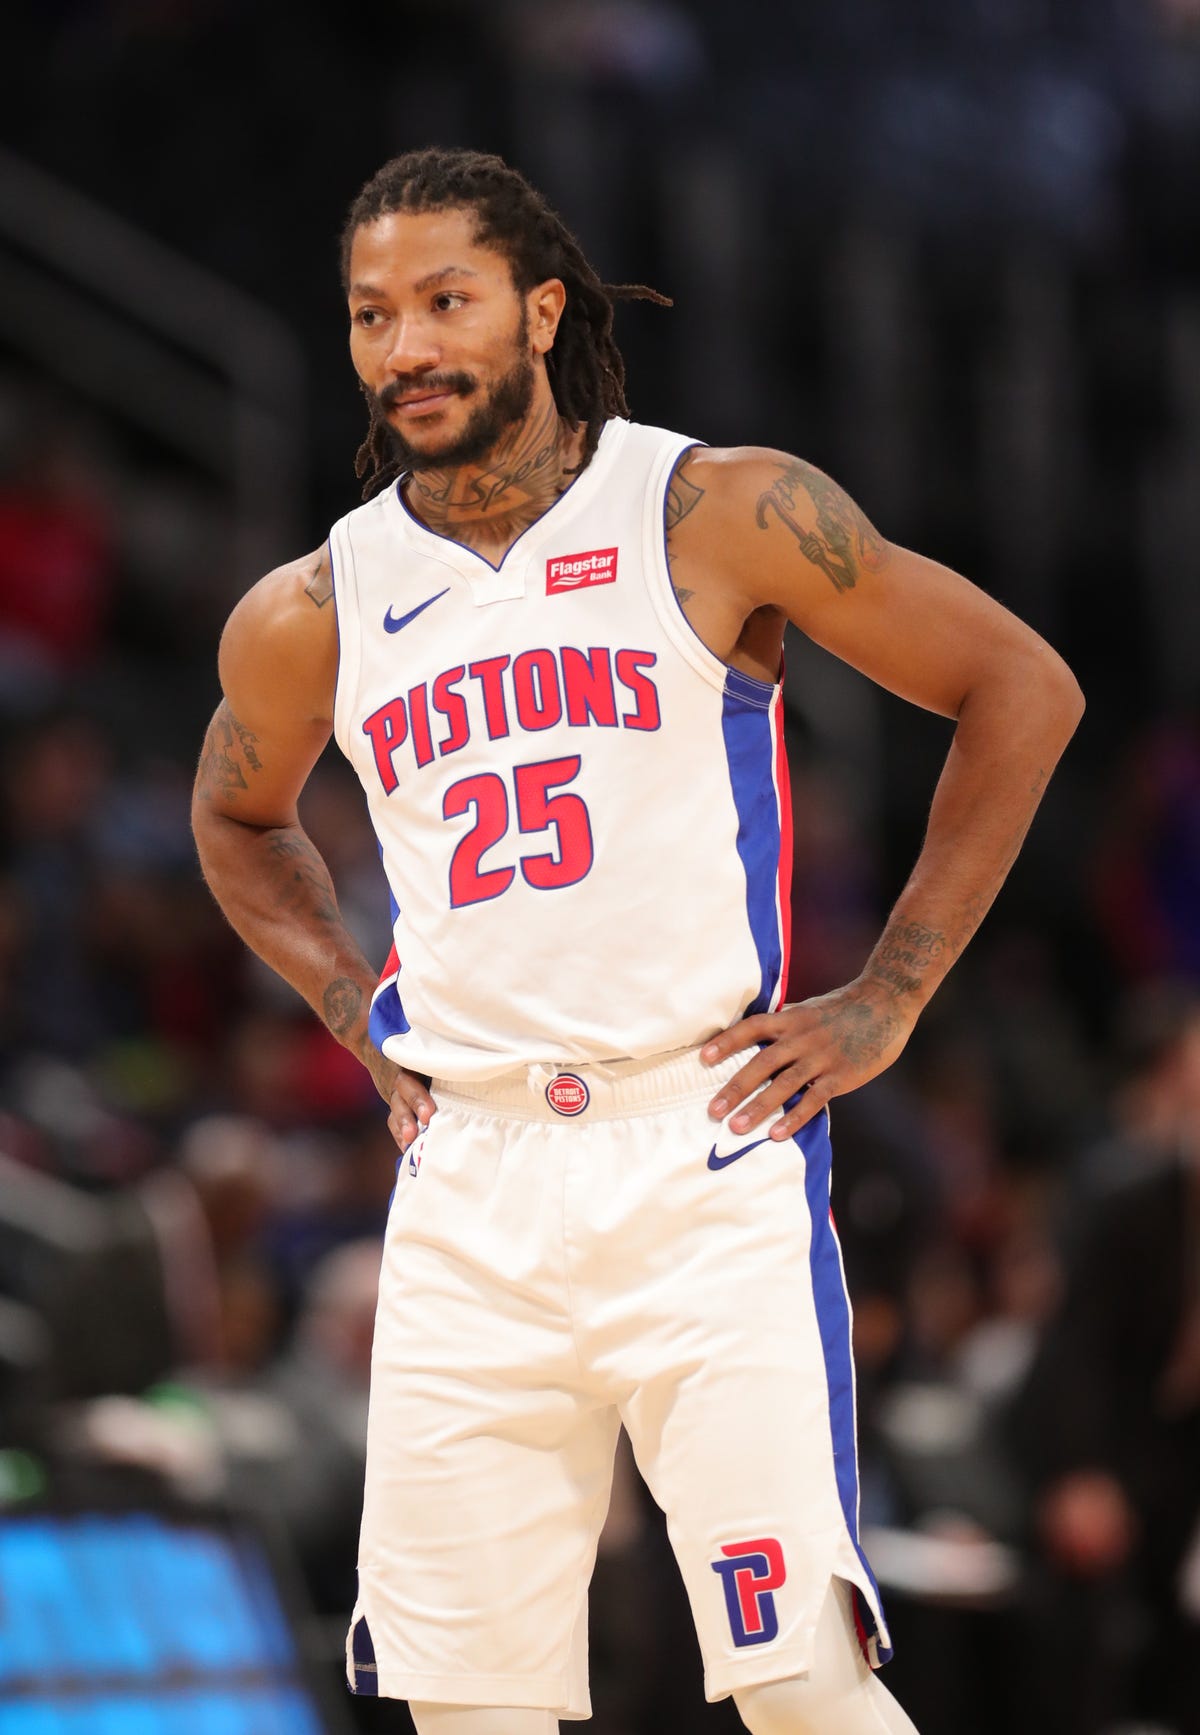 Detroit Pistons' Derrick Rose plays with kids in video at home